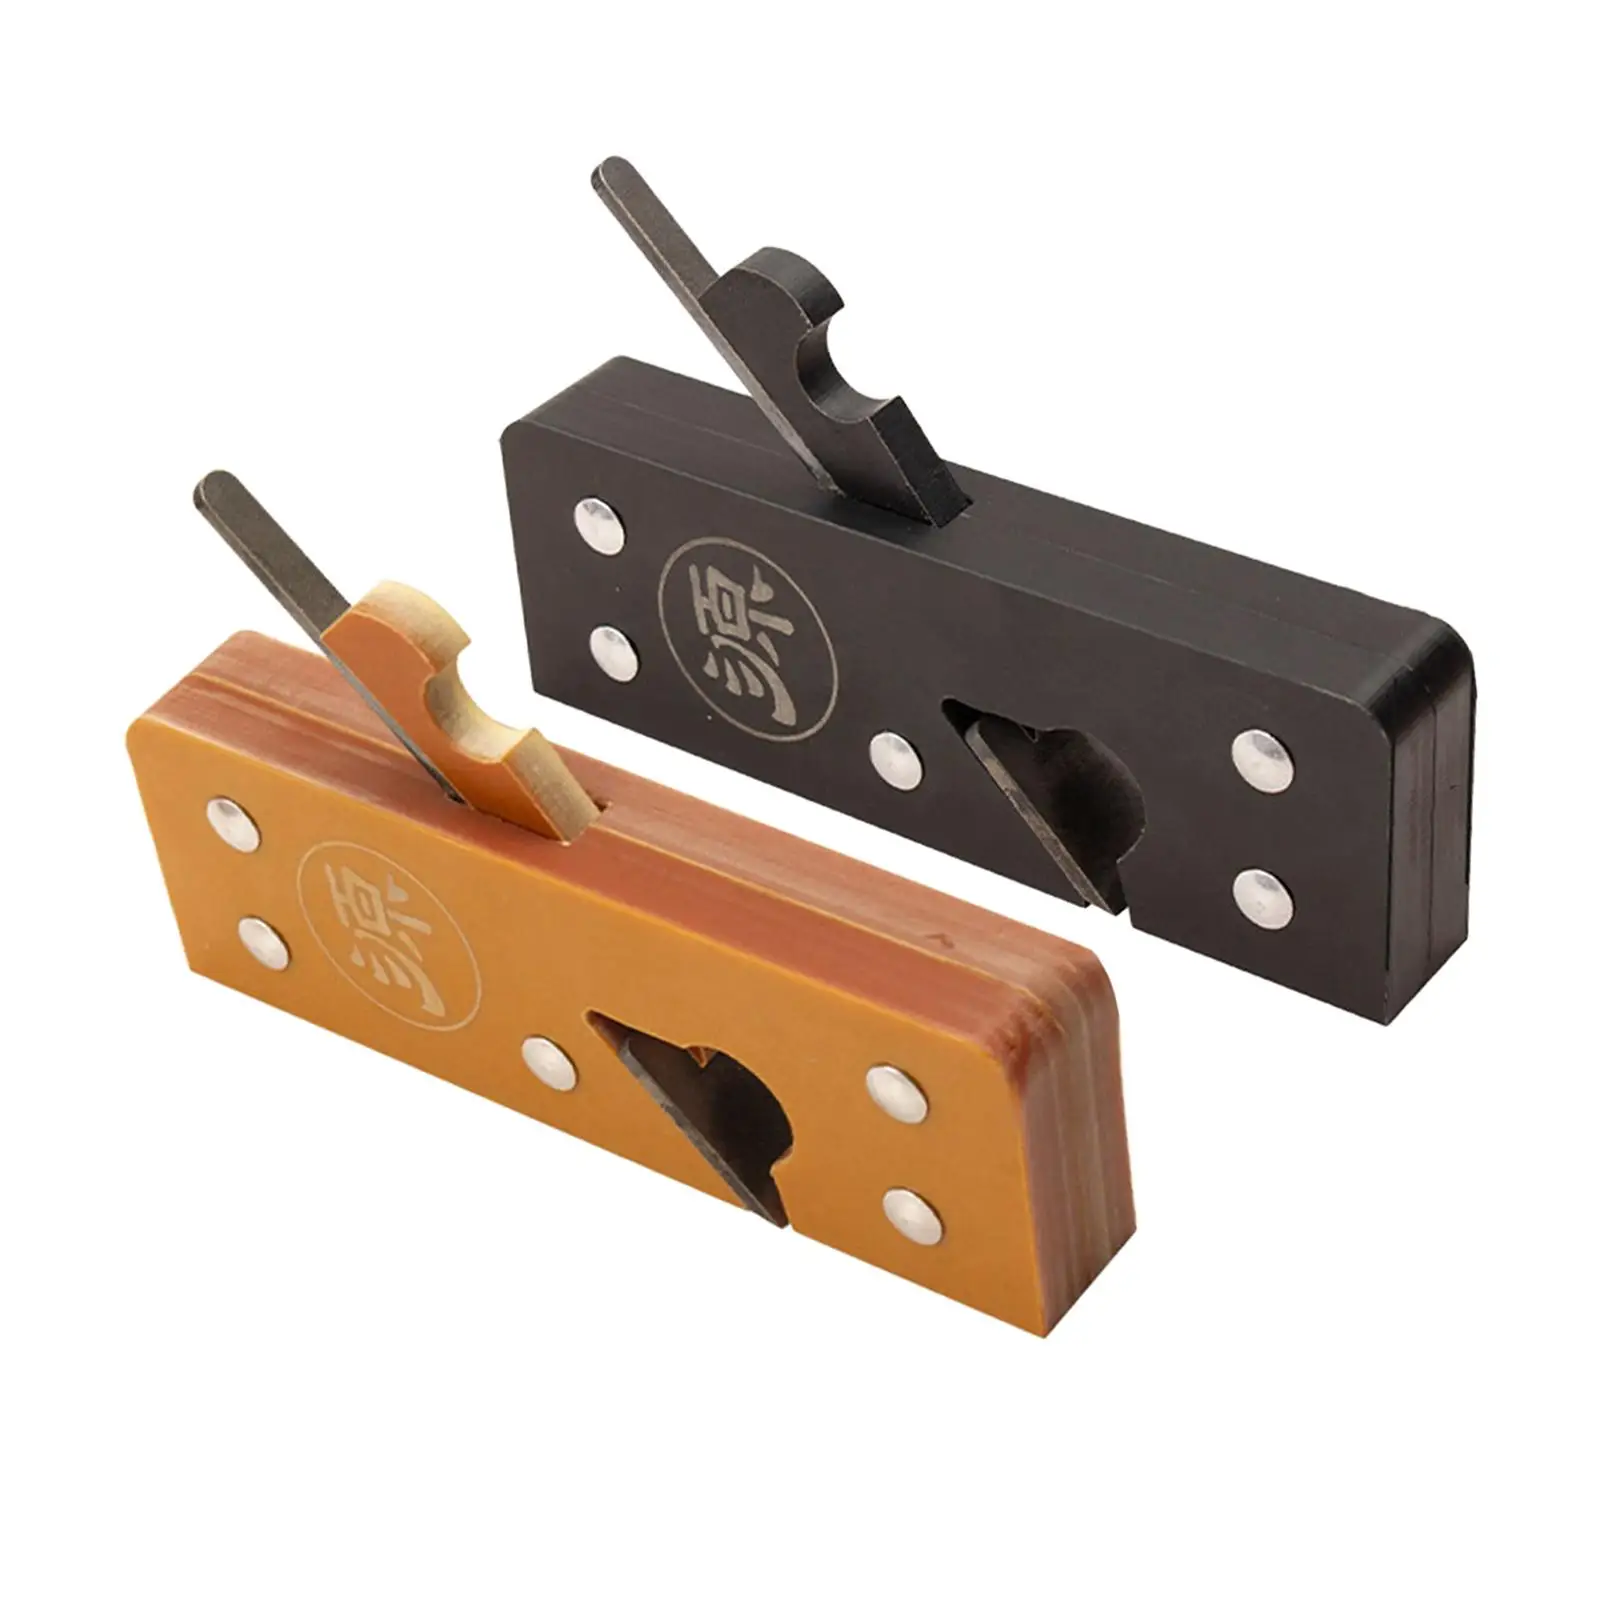 Portable Wood Plane Mini Carpenter Grooving Trimming Planer Adjustable Plane Manual Wrench Woodworking Tool